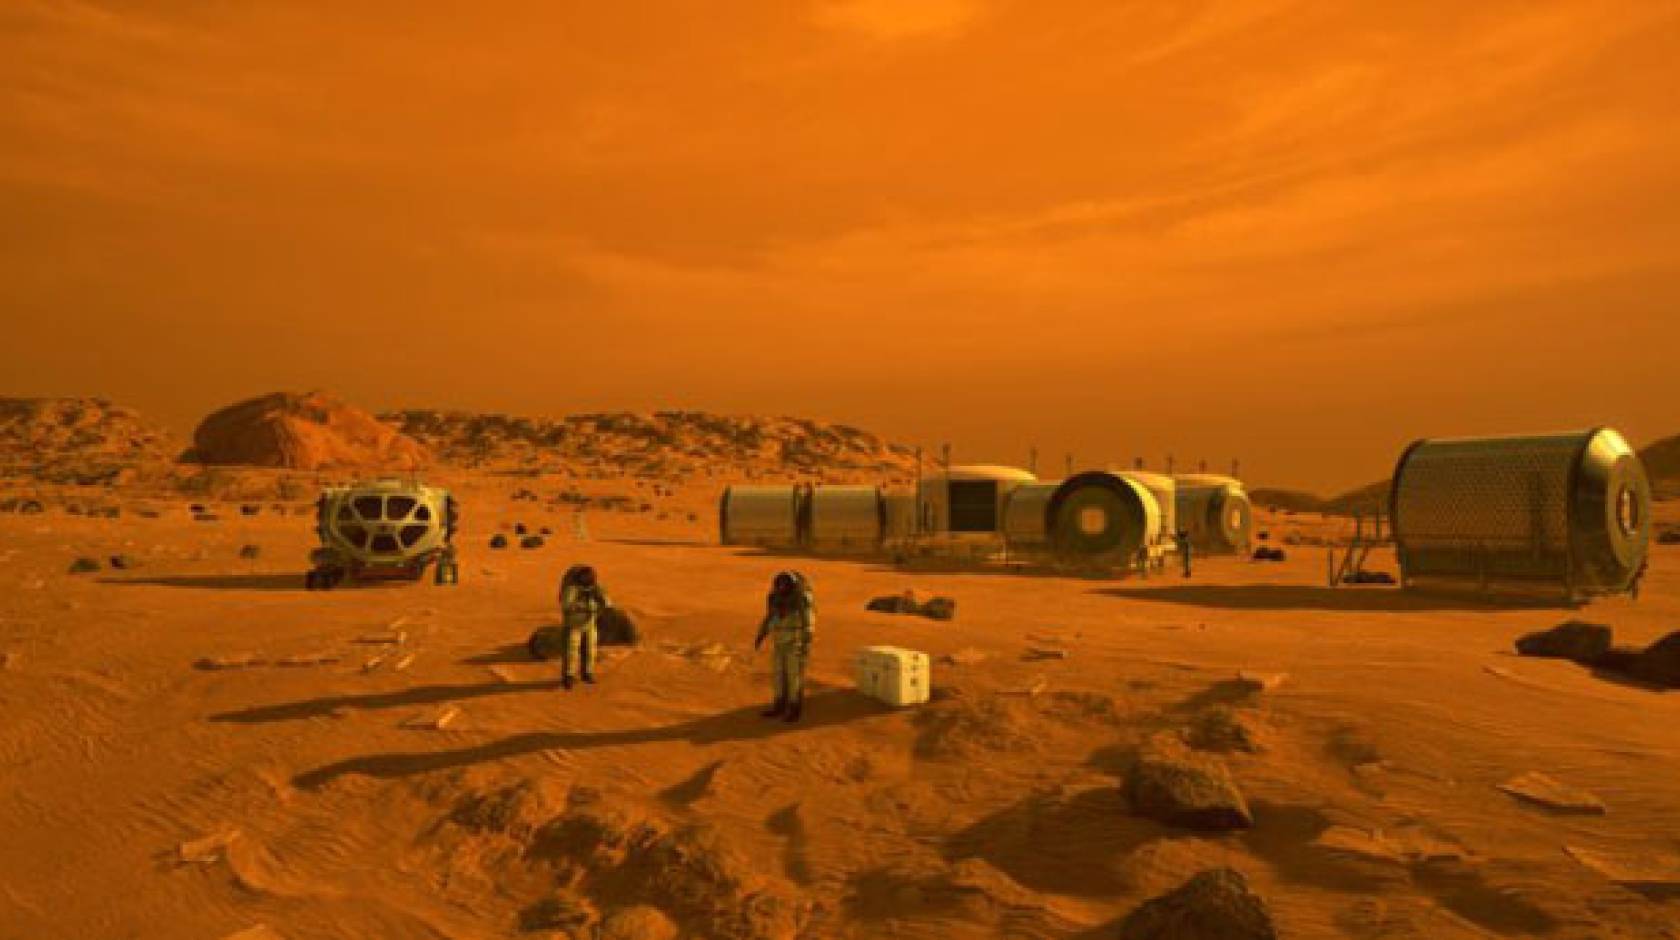 Astronauts and a facility on Mars illustration